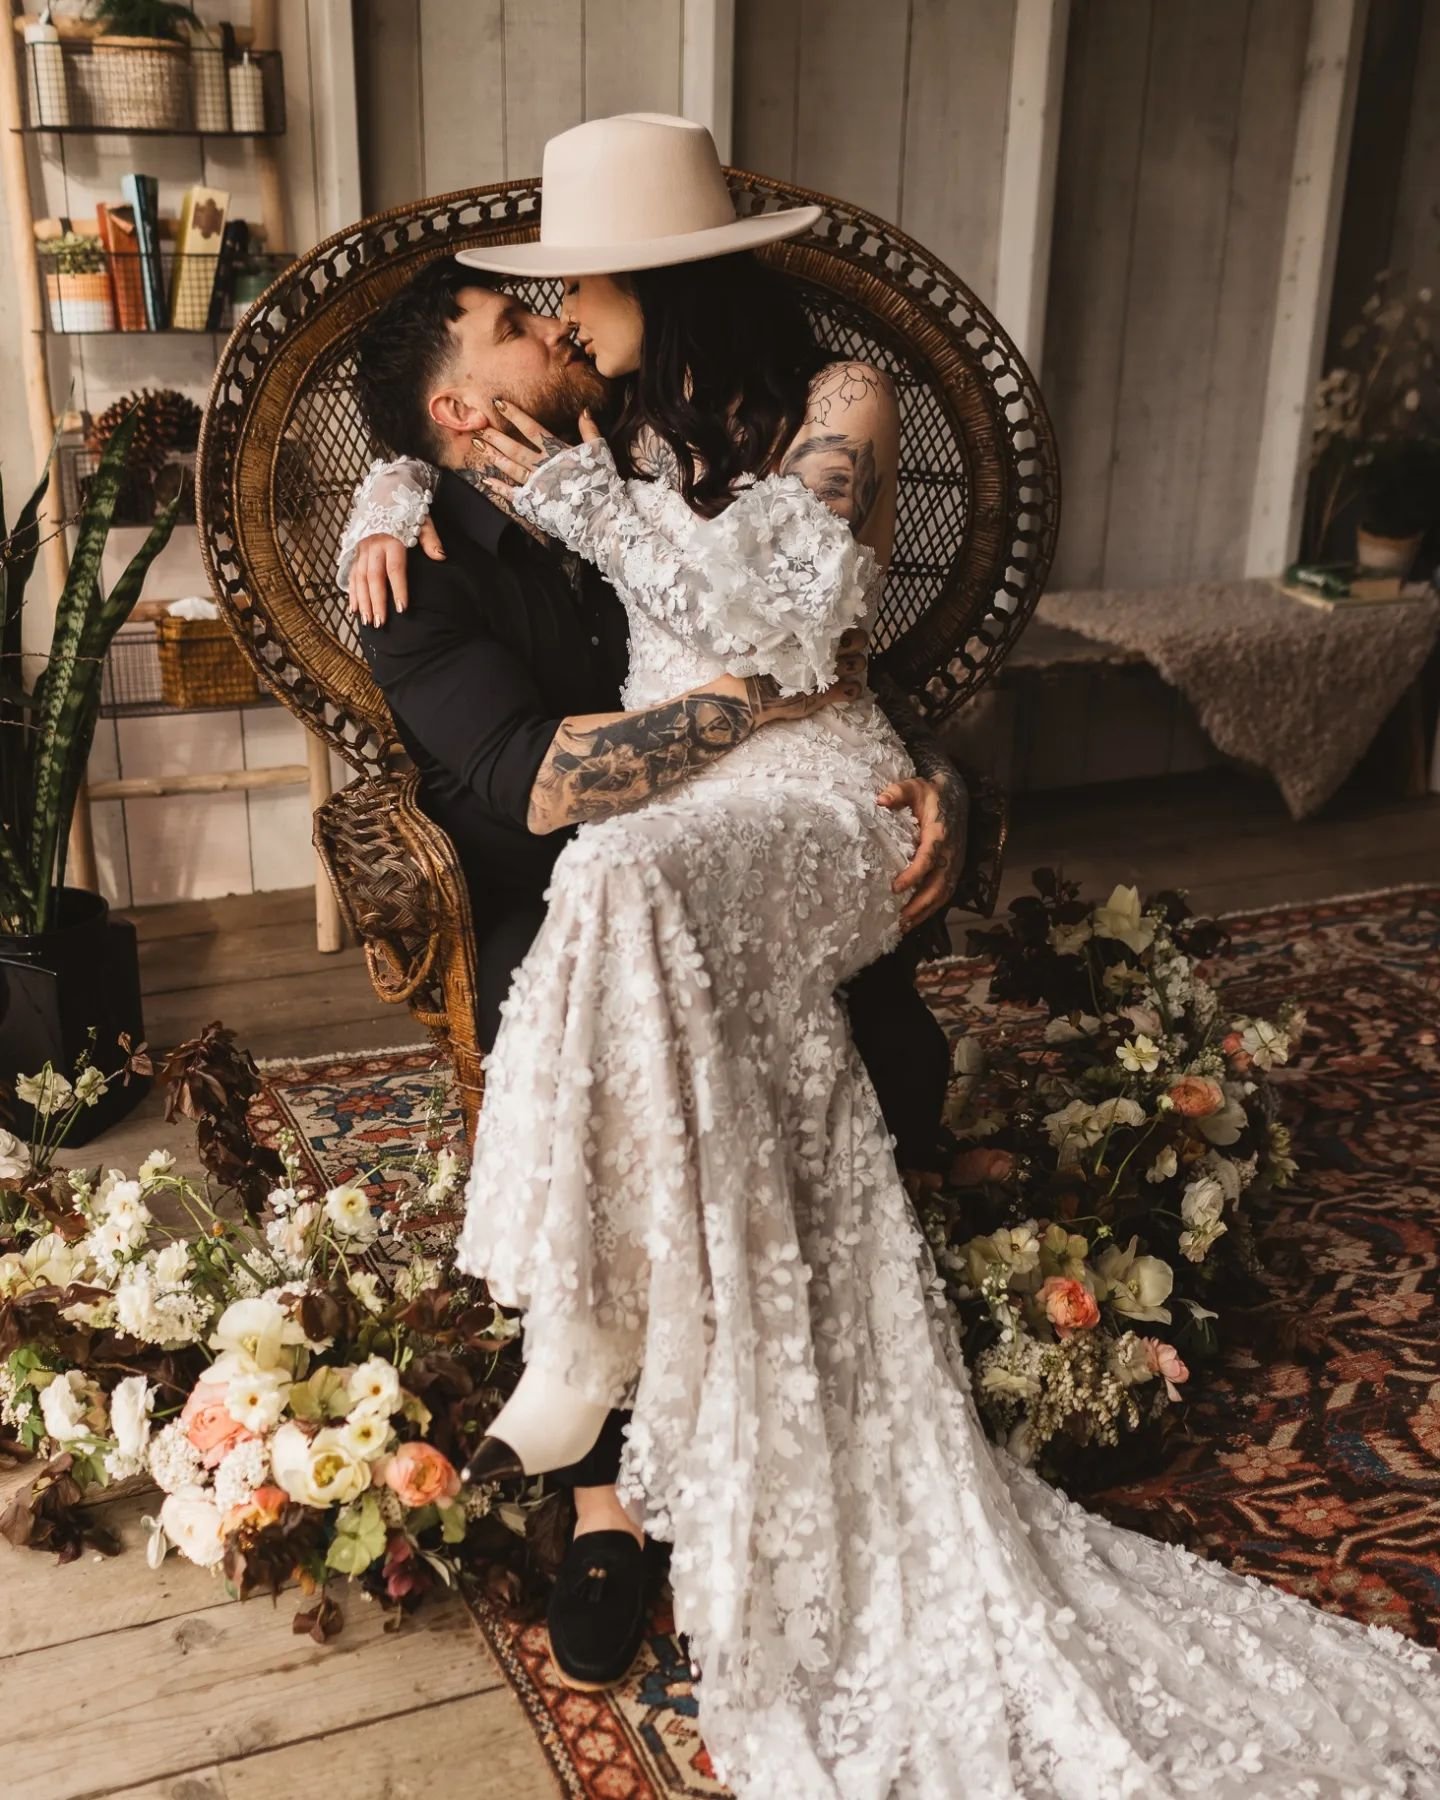 THESE TWO THOUGH 🖤 ⚡️🖤
Turning all my tattooed, hat wearing, cake smooshing, boat house dreams into reality ⚡️
My second styled shoot of the year and I loved every single second of it, until I sprained my ankle that is haha! But we power through...